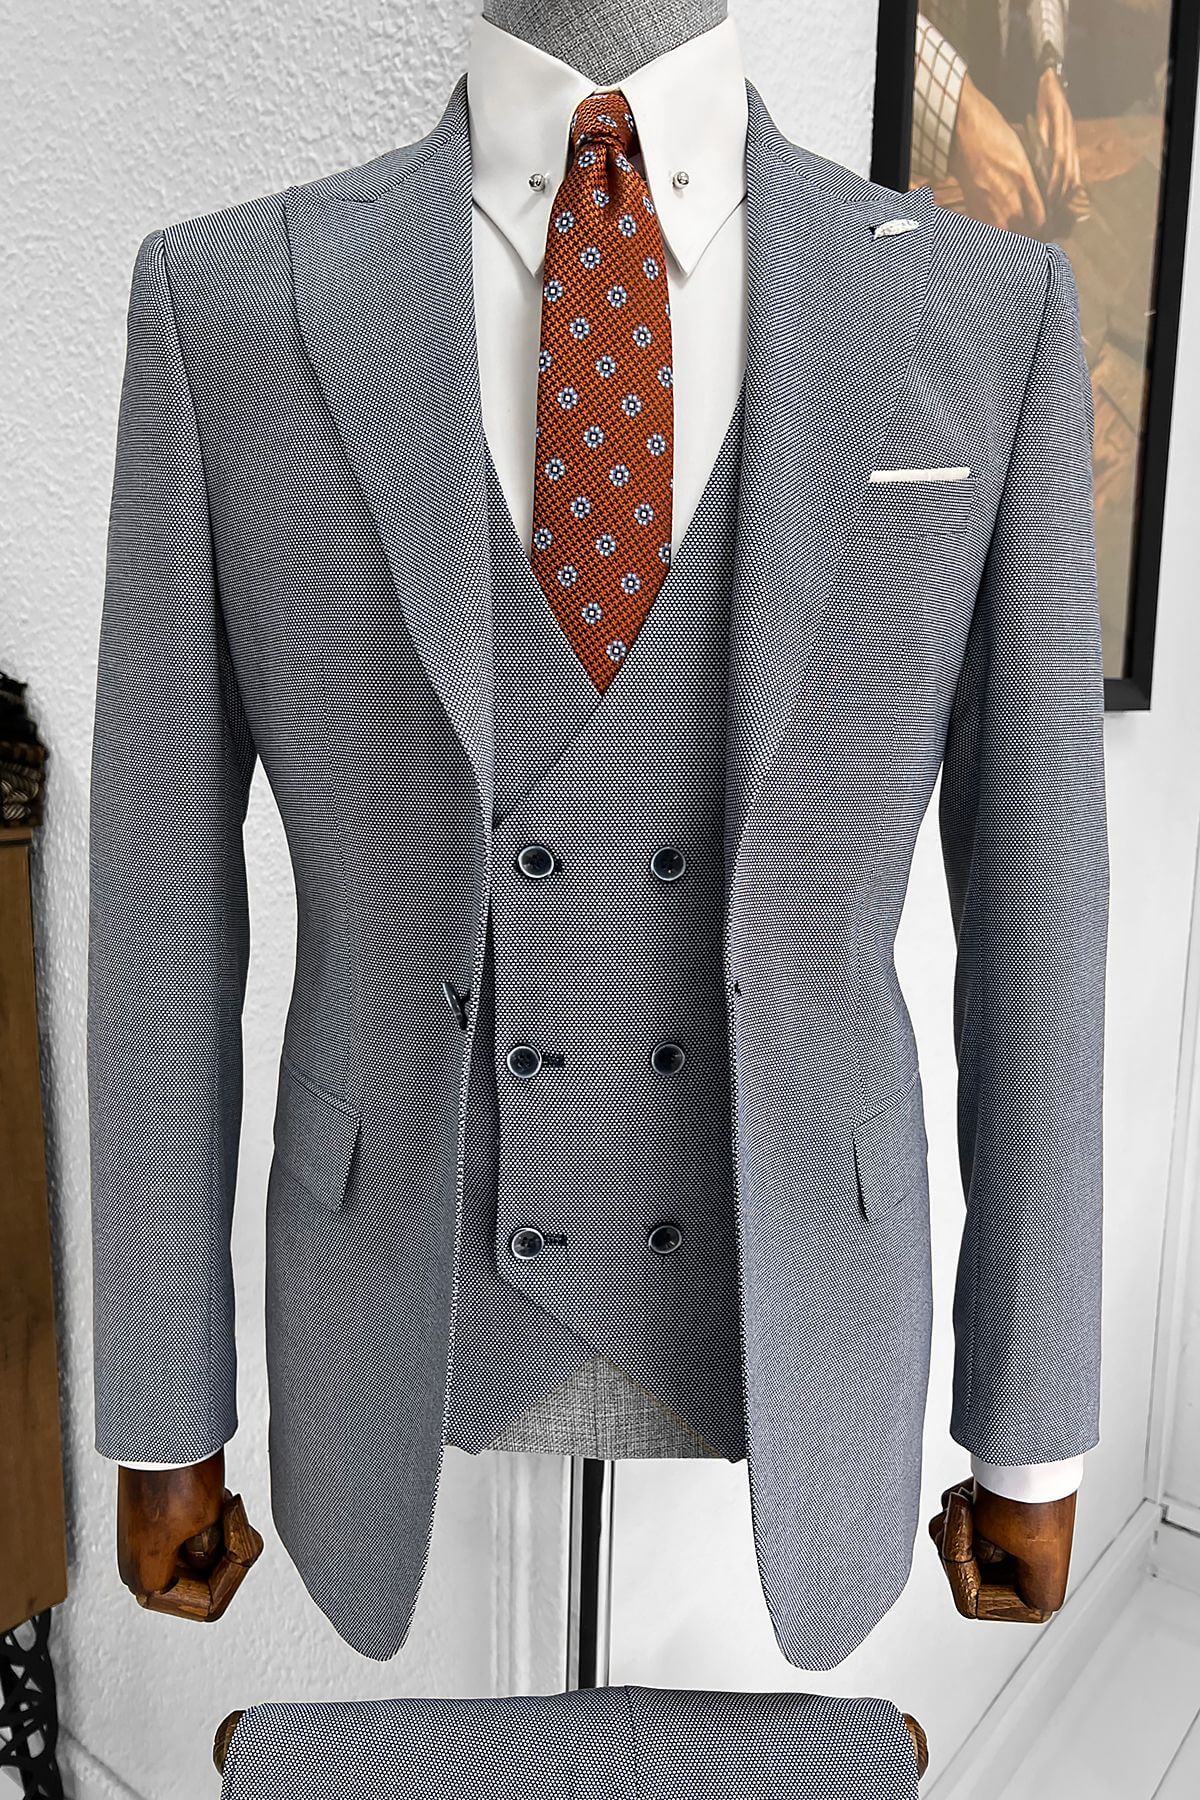 A Patterned Slim-fit Light Blue Wool Suit on display